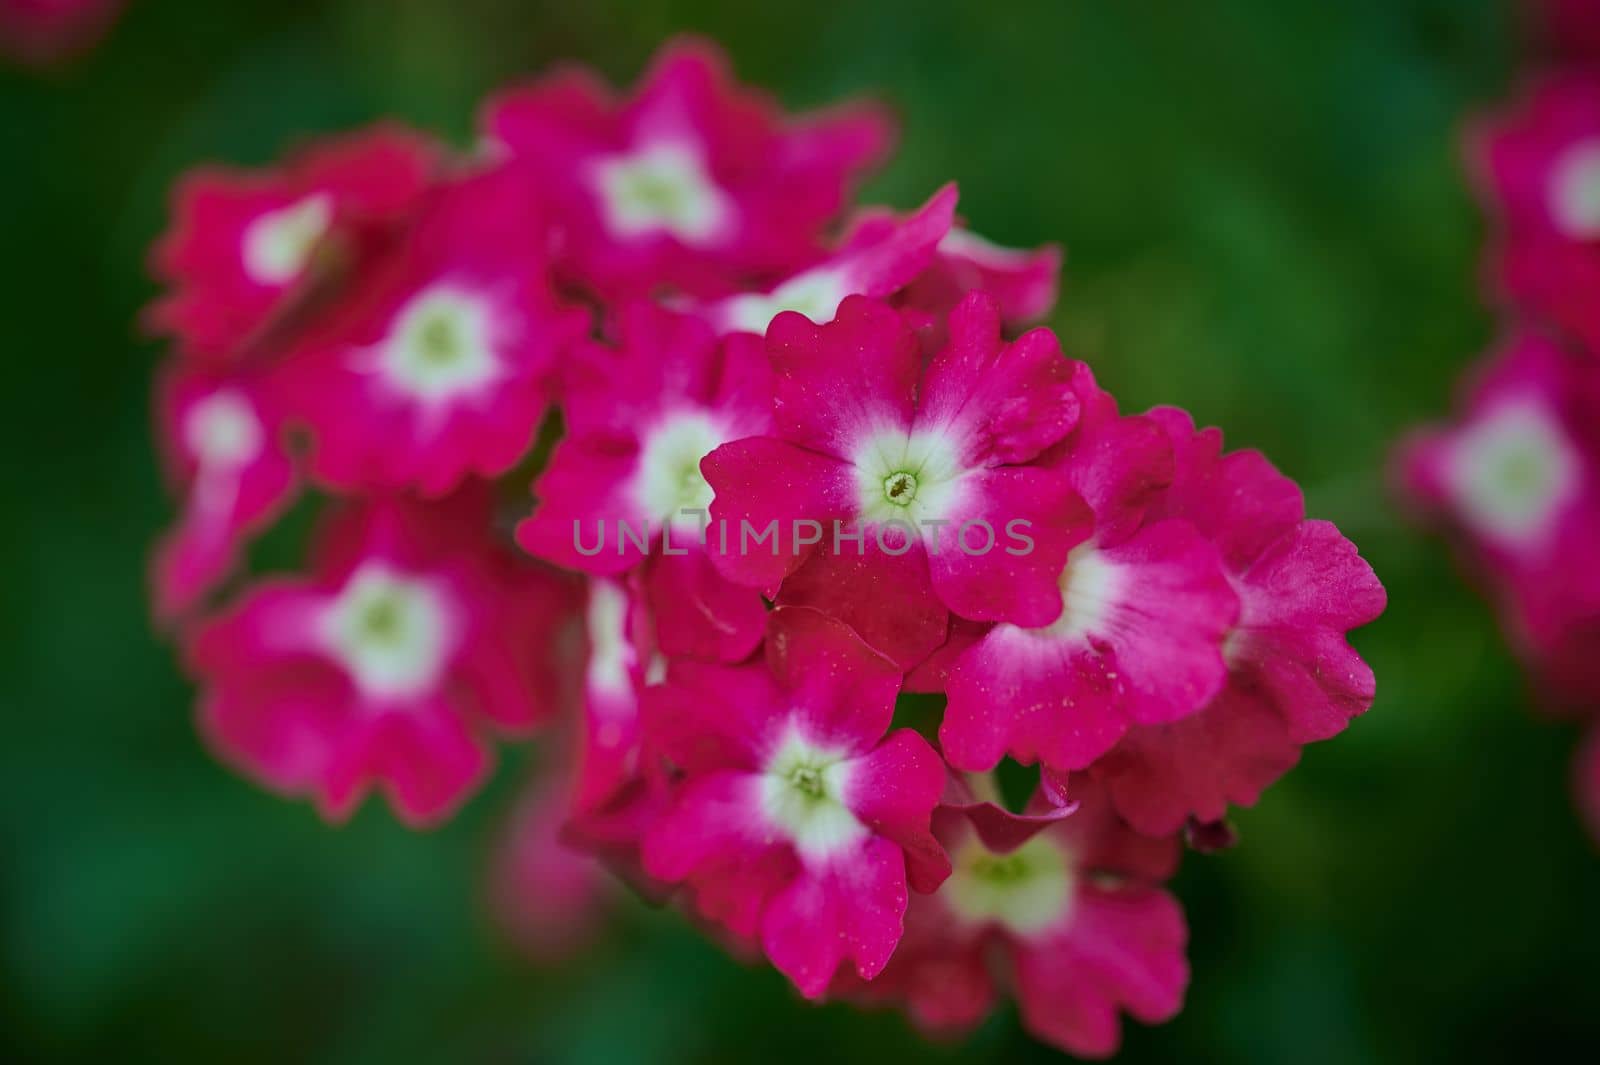 A garden flower with many small pink flowers in the sunshine with a blurred natural green background.